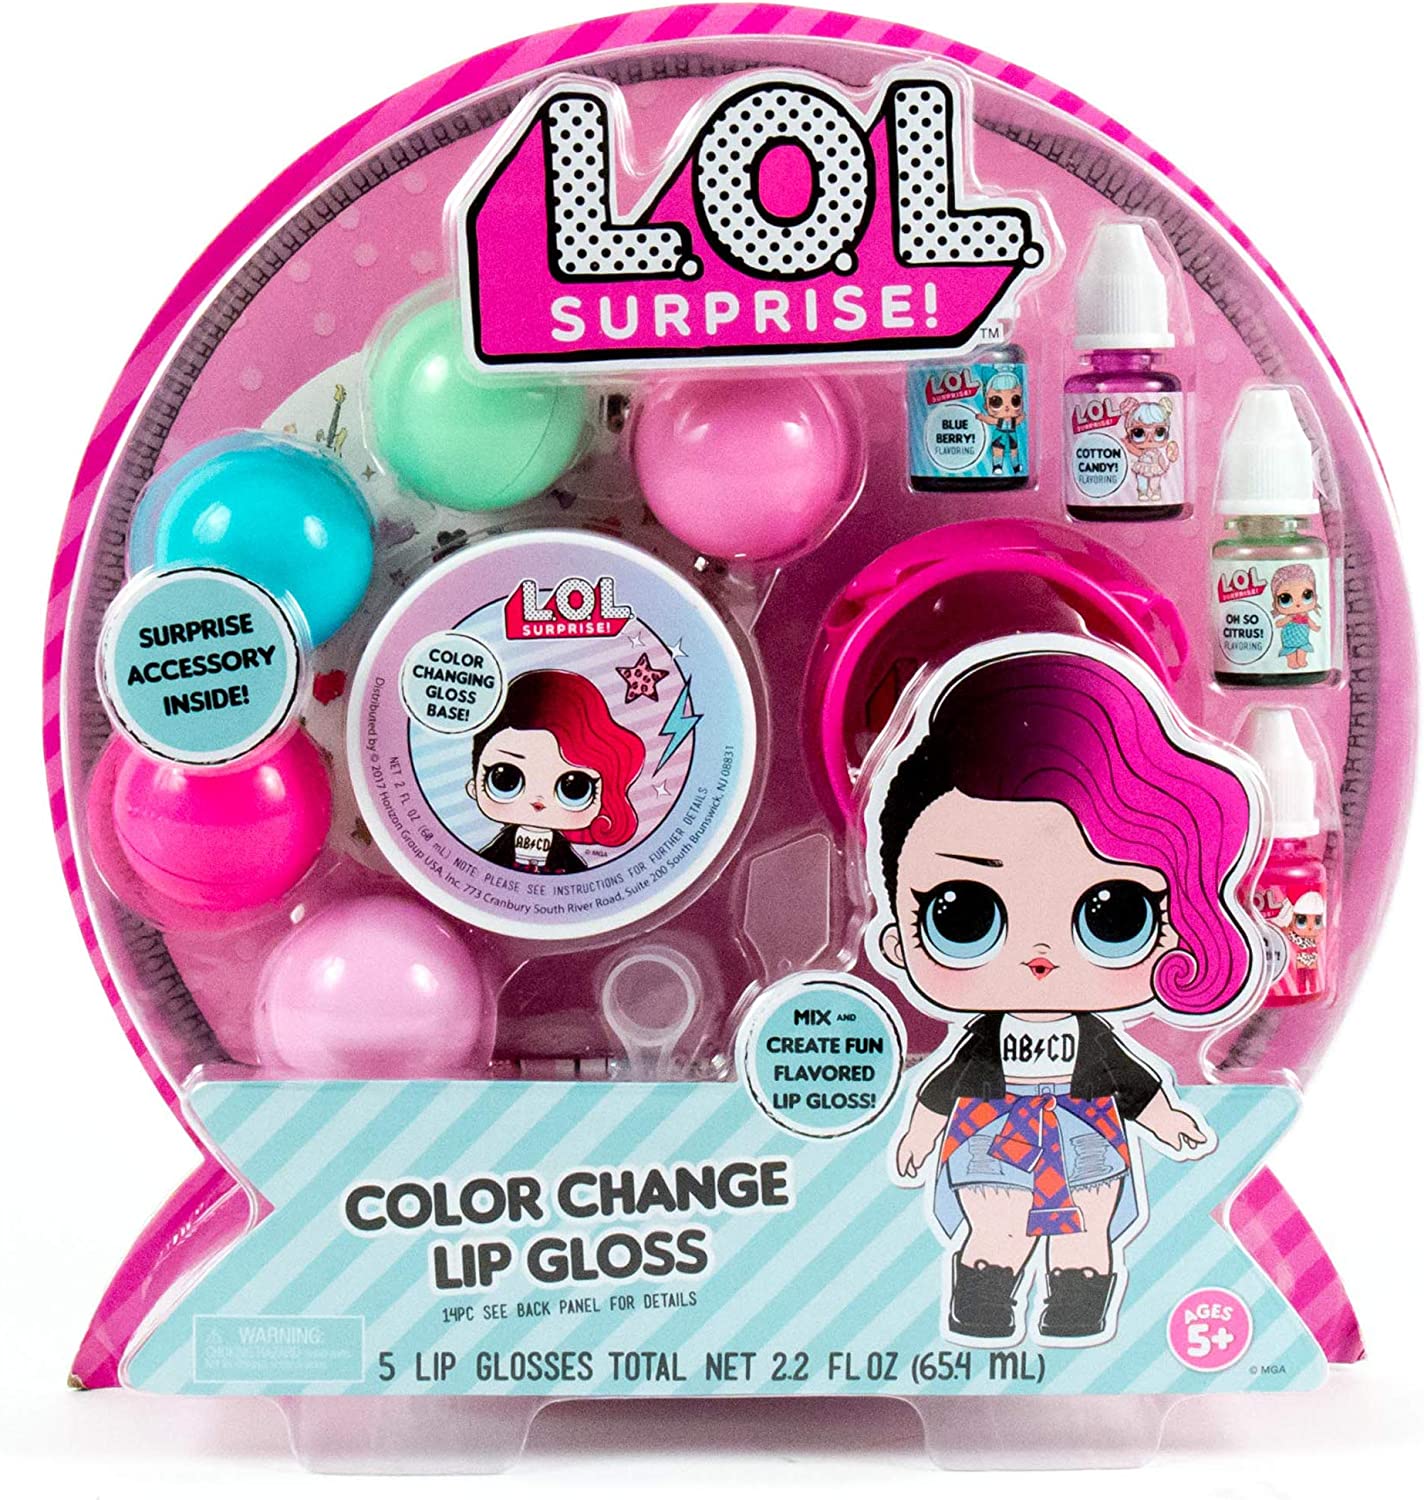 L.O.L. Surprise! Color Change Lip Gloss By Horizon Group USA, Mix & Create 5 Color Changing Multi Flavored Lip Glosses,DIY Lip Gloss Making Kit, Containers & Decorative Stickers Included.Multicolored